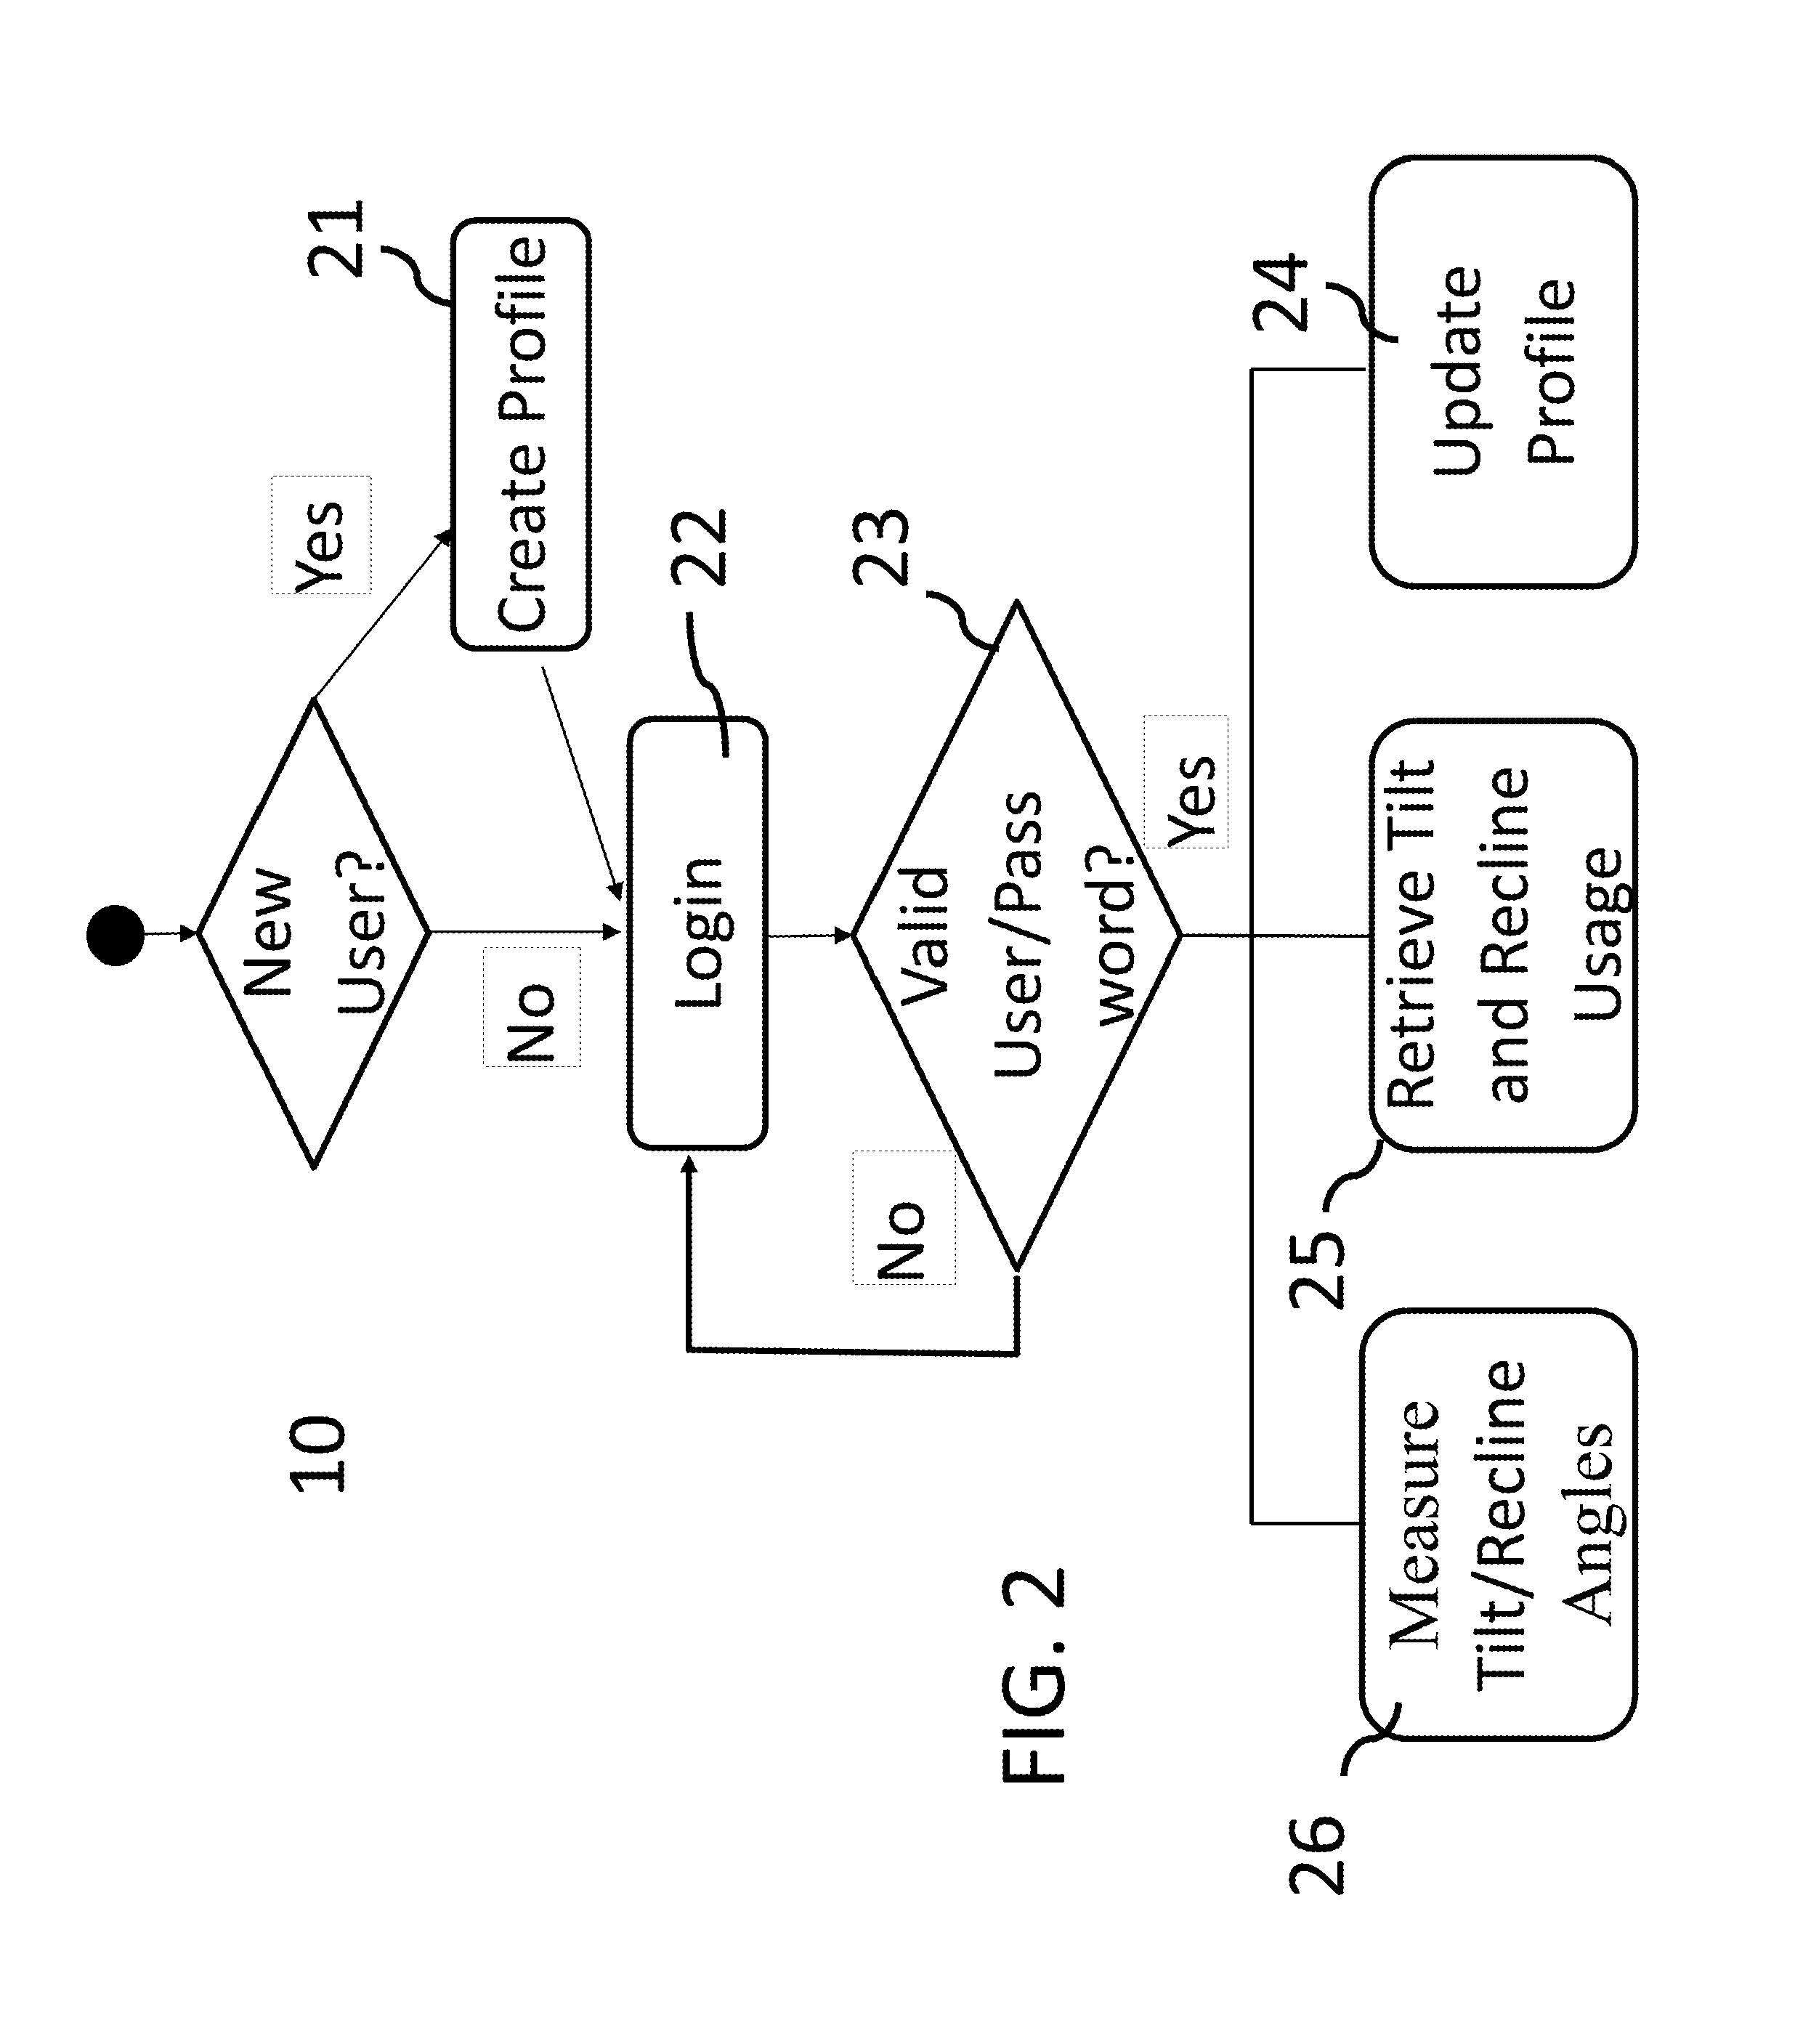 Intelligent apparatus for providing personalized configuration of wheelchair tilt and recline